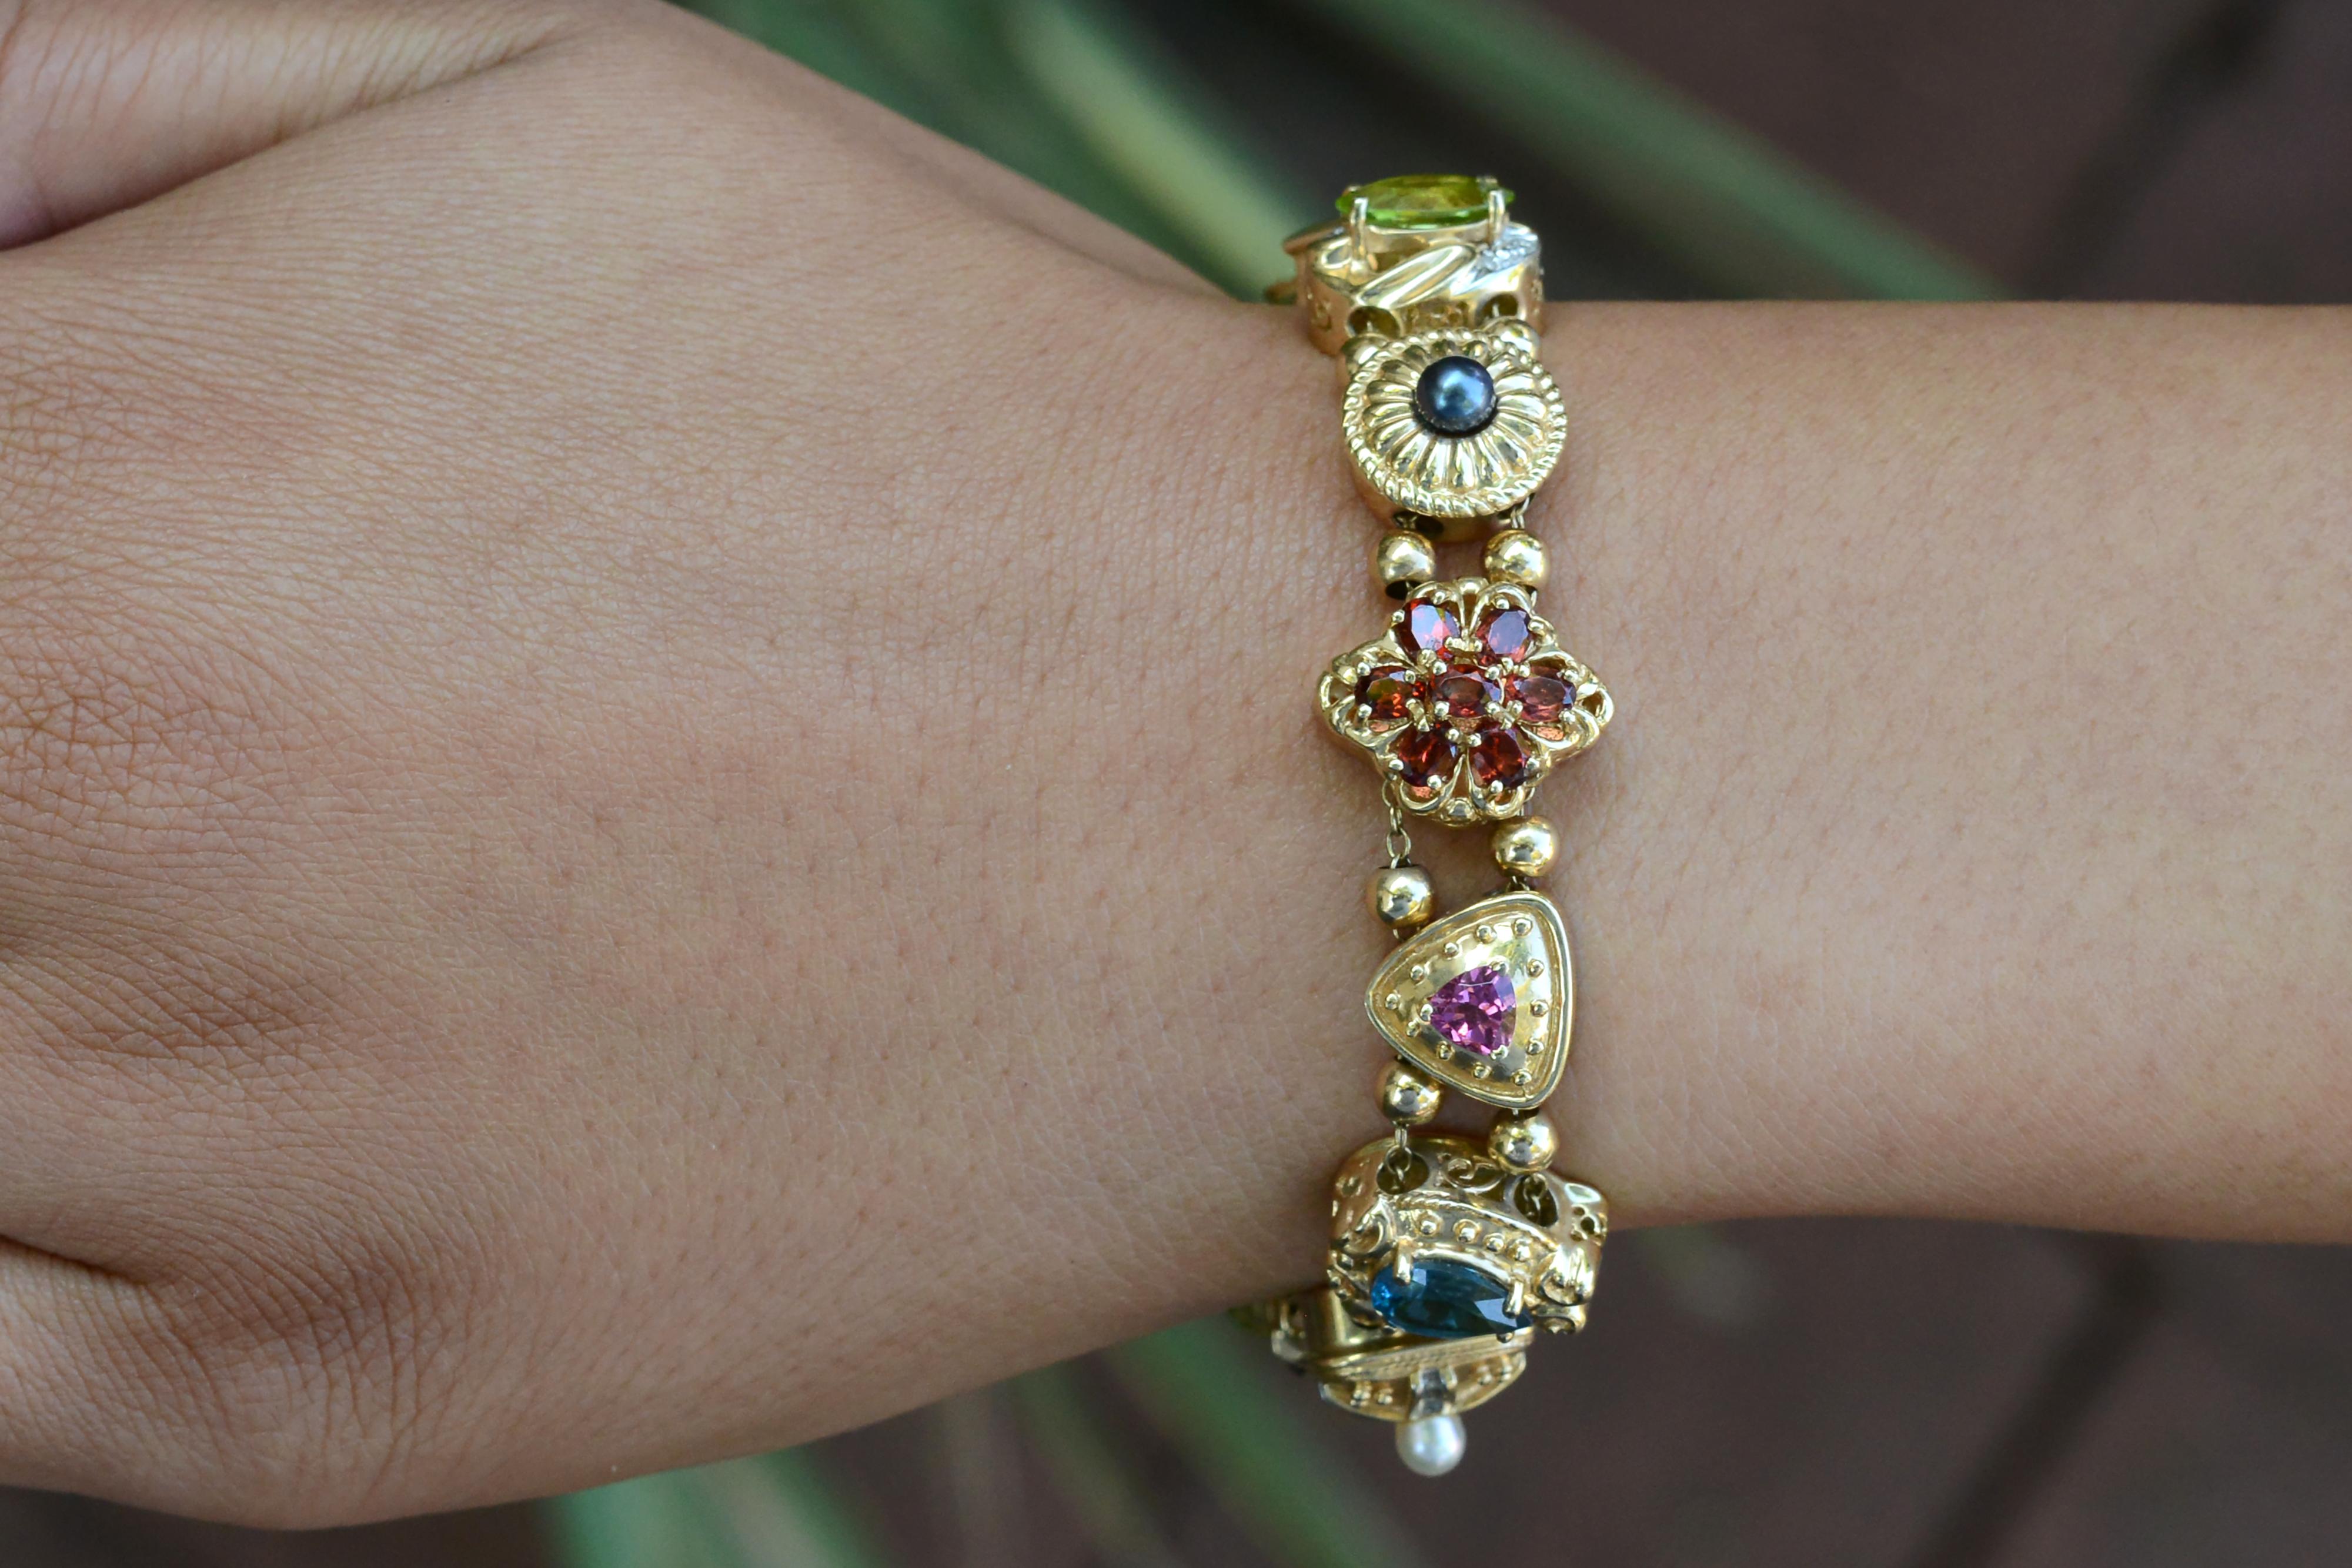 Vintage and lively with charm, this Victorian inspired slide bracelet displays a multitude of natural gemstones. From pearls to diamonds, to lush green peridot, onyx, blue topaz, citrine to luxurious garnets. Originally fabricated from stickpins